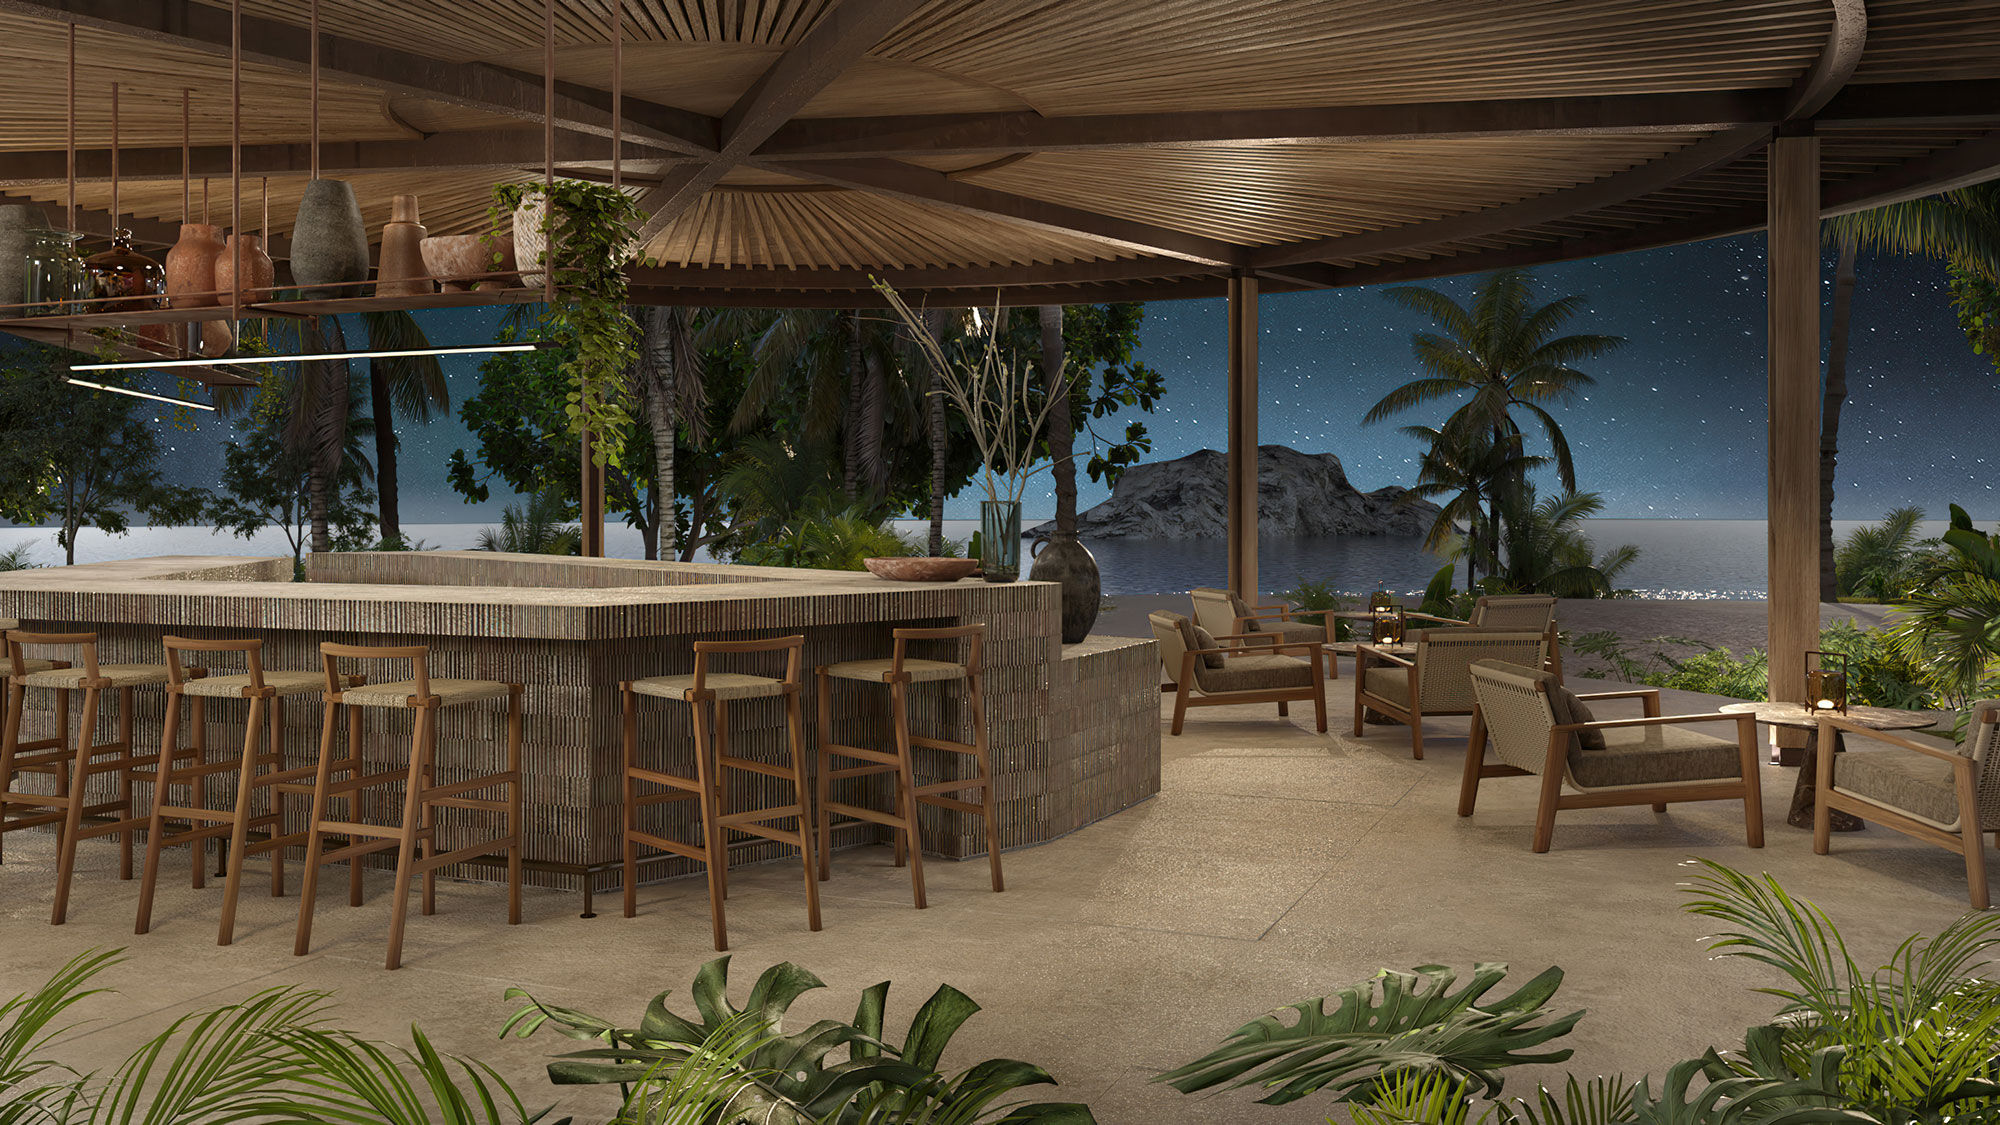 A rendering of the Marietas Pool & Restaurant at the resort.